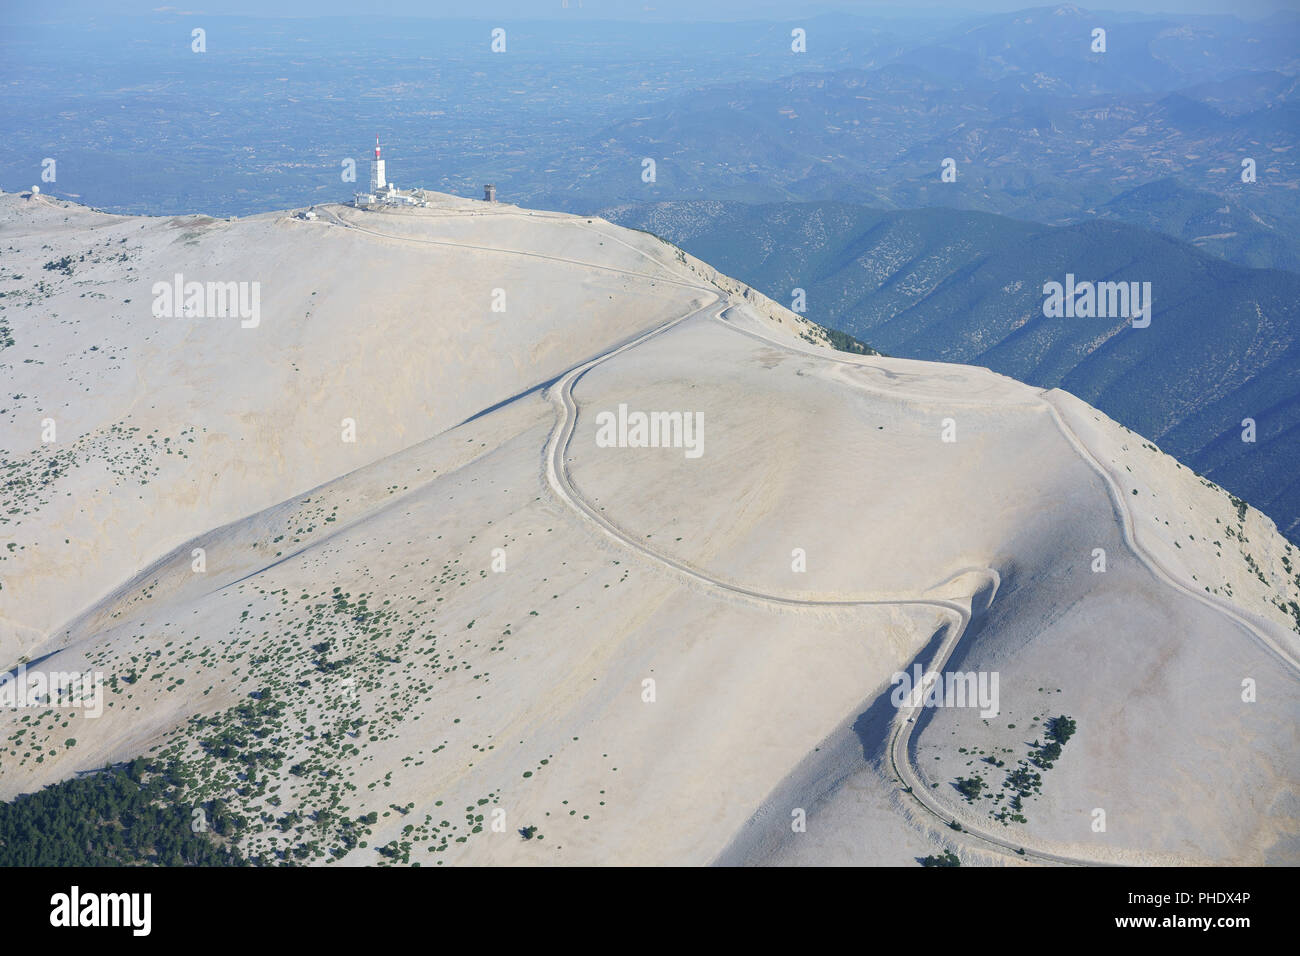 AERIAL VIEW. Barren summit of Mont Ventoux with its trademark of white limestone rocks. Bédoin, Vaucluse, Provence-Alpes-Côte d'Azur, France. Stock Photo